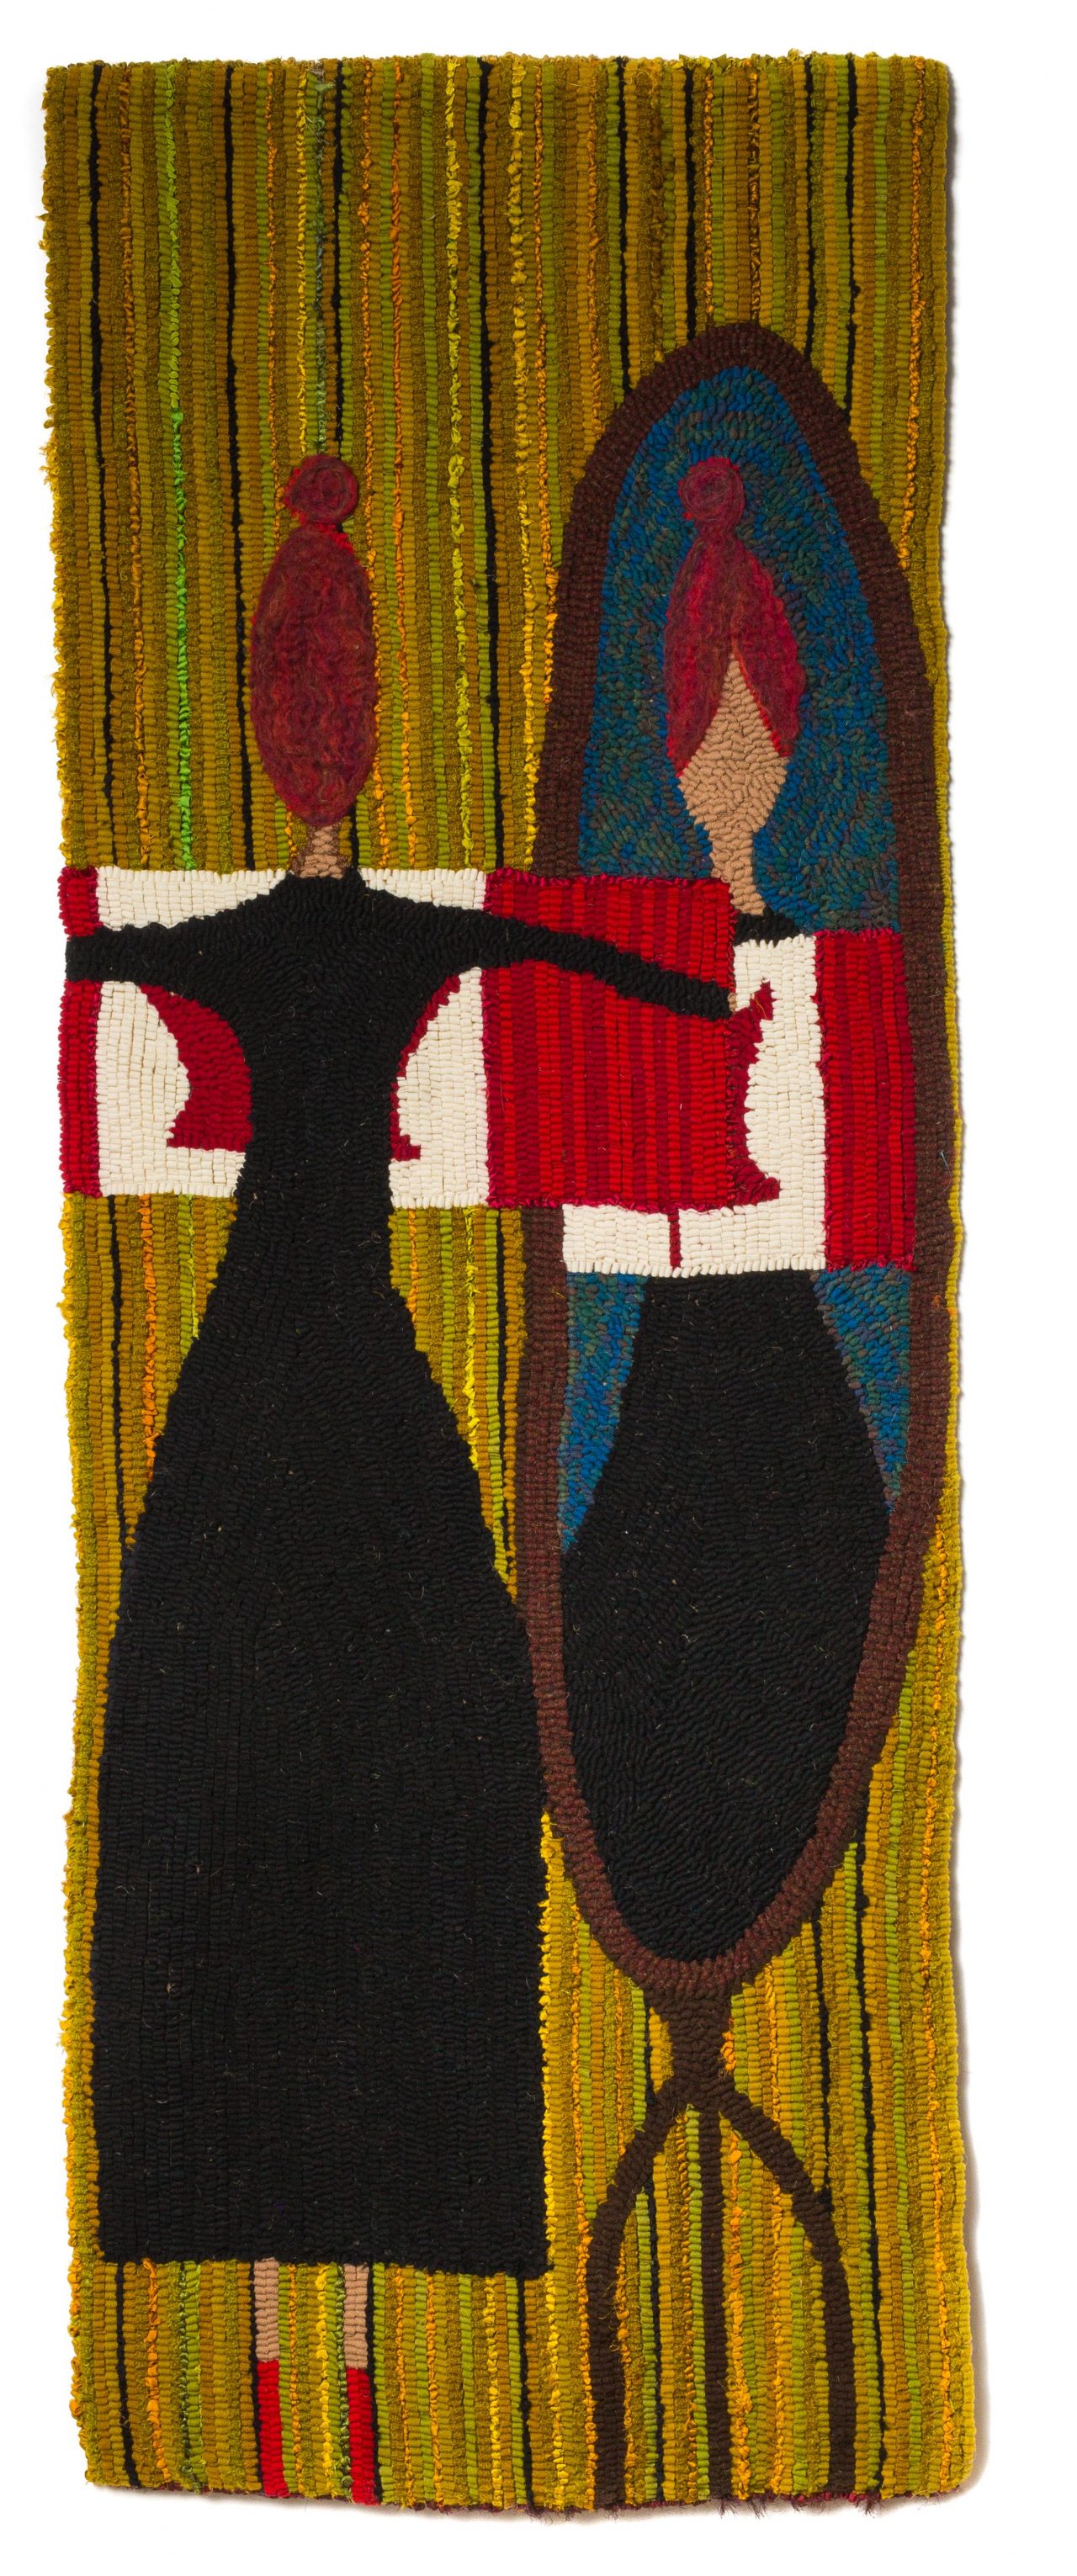 A piece of rug hooked art featuring a central female figure holding a Canadian flag, looking at her reflection in a mirror by Laura Kenney.